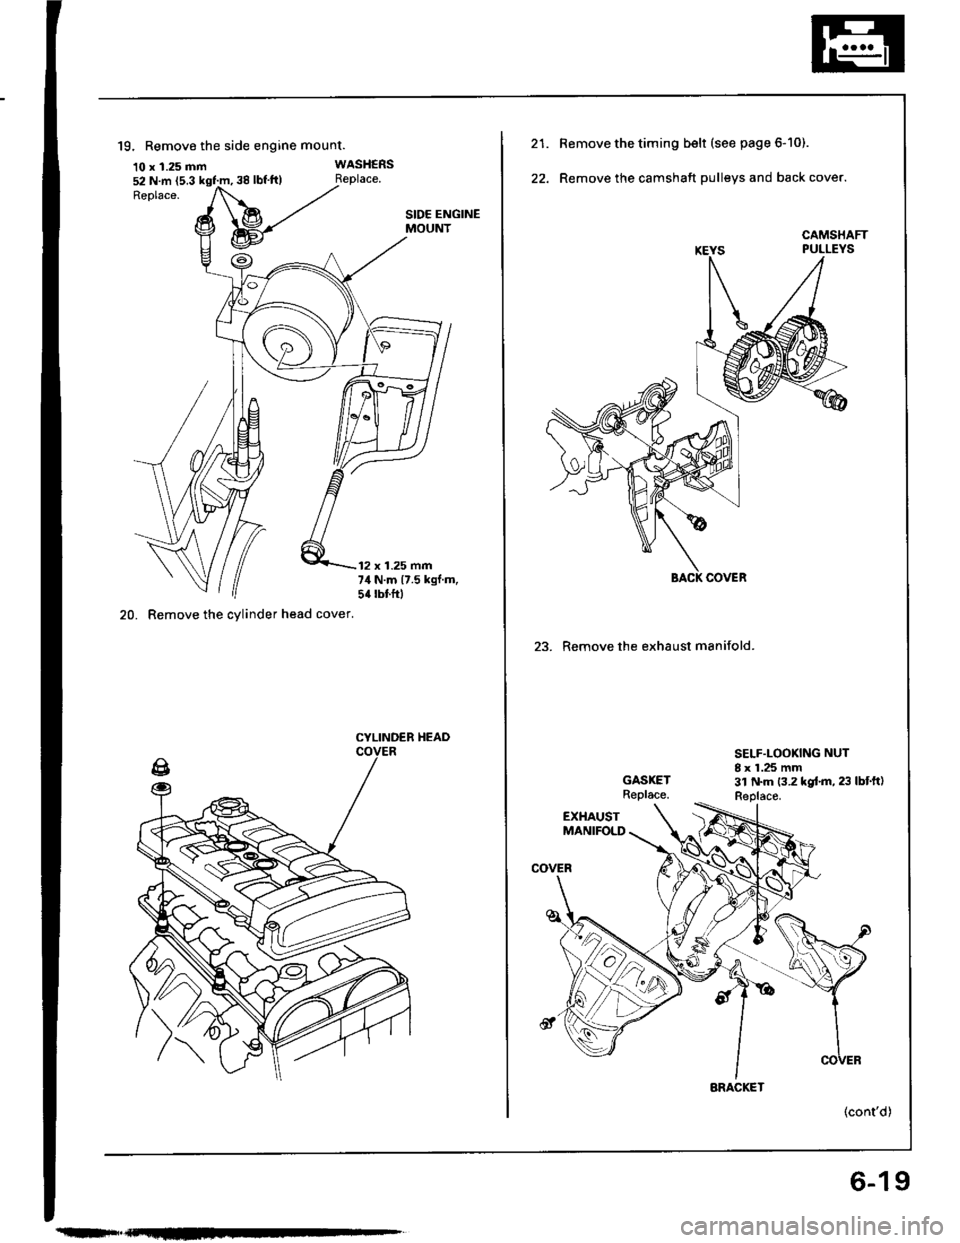 HONDA INTEGRA 1994 4.G Workshop Manual 52 N.m (5.3 kgtm, 38 lbfft)
19. Remove the side engine mount.
10 x 1.25 mm
20. Remove the cylinder head cover.
WASHERS
SIDE ENGINEMOUNT
12 x 1.25 mm74 N.m {7.5 kgf.m,5{ rbtftl
CYLINDEB HEAD
Remove t